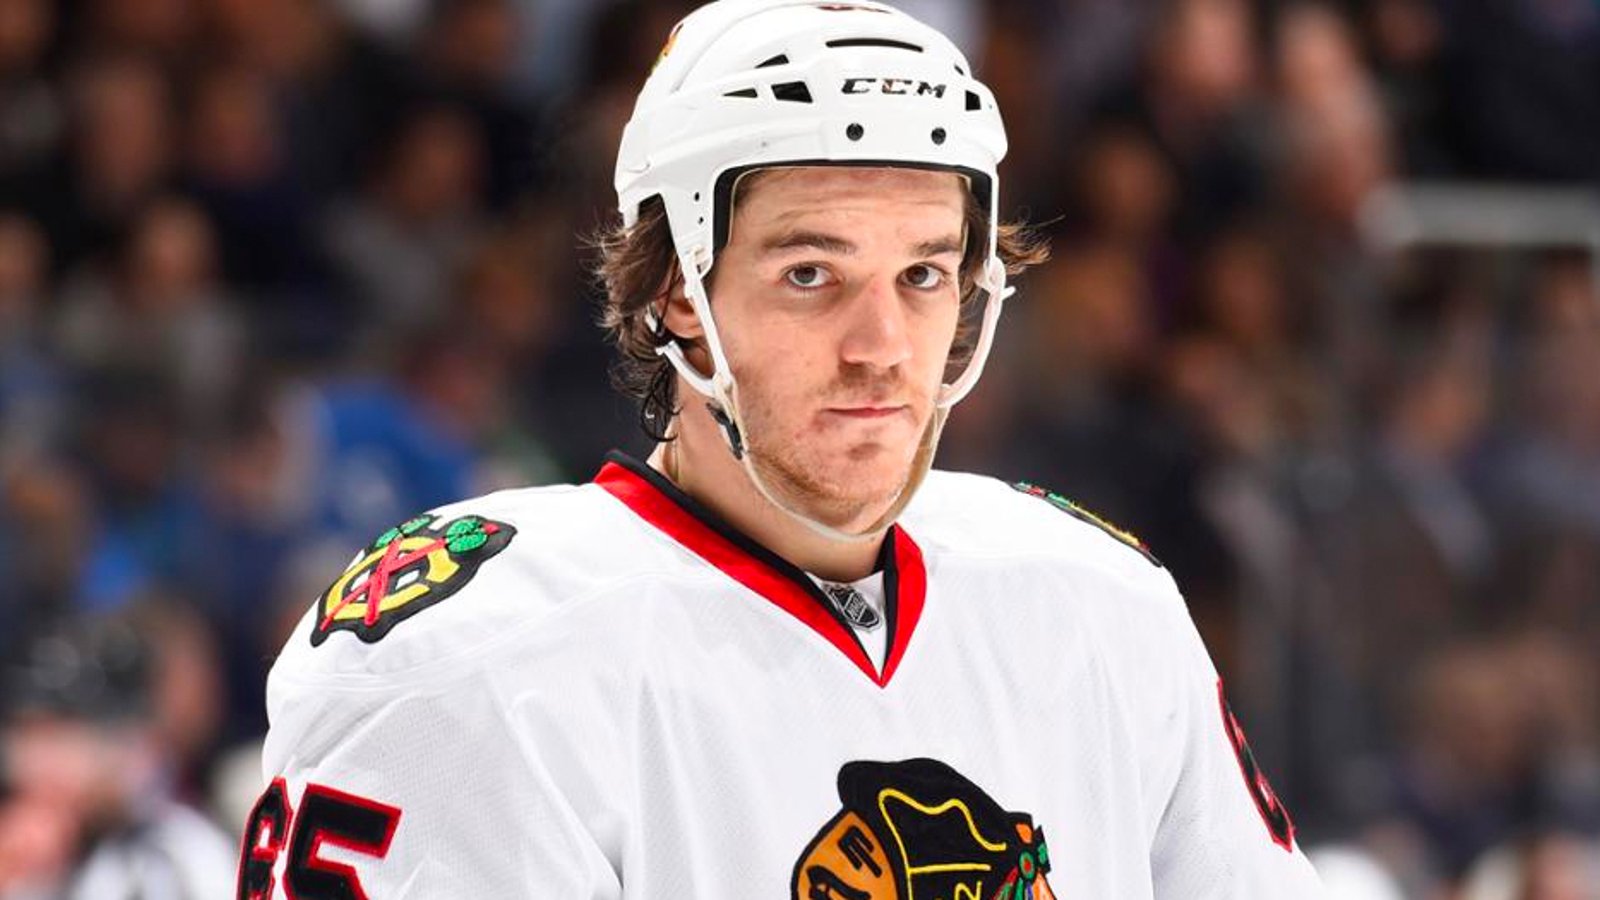 Shaw opens up on concussion issues, talks about retirement